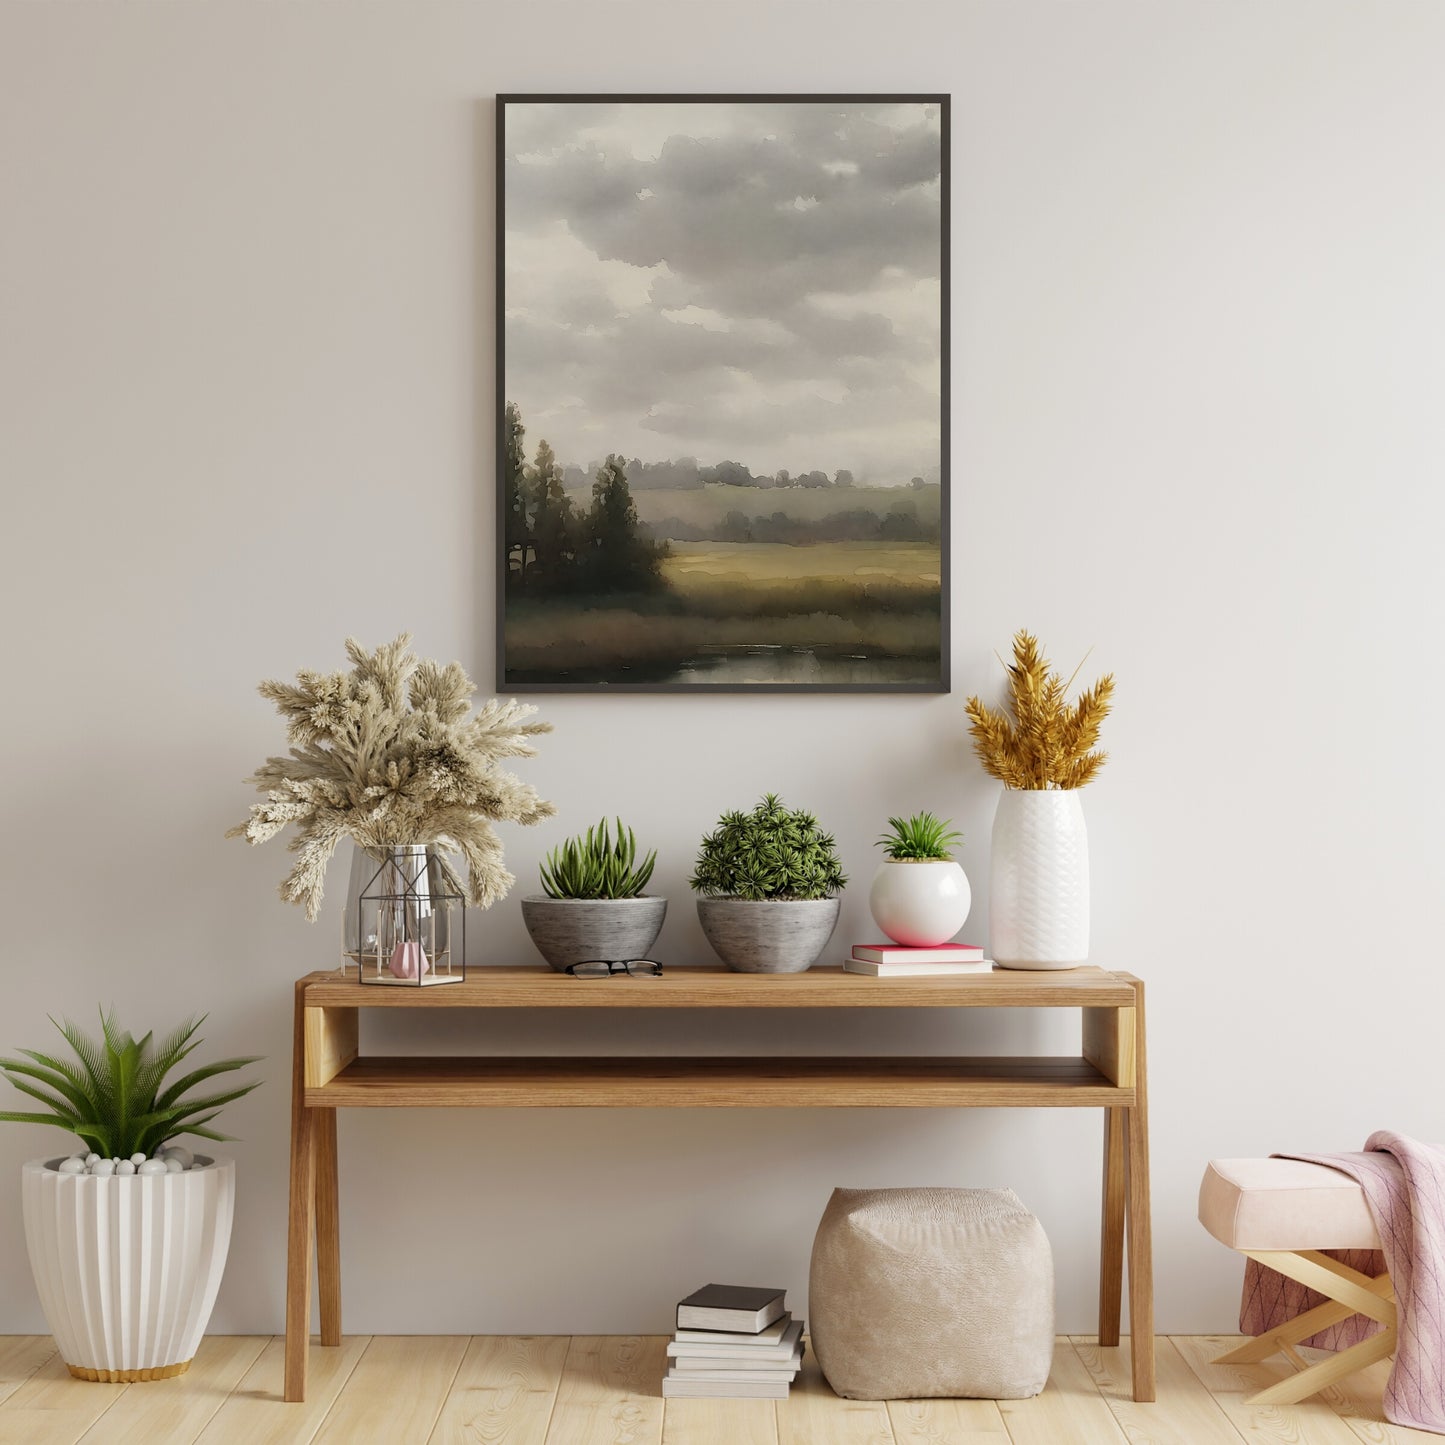 Rural Countryside Paper Poster Prints Wall Art Watercolor Painting Cottagecore Neutral Living Room Decor Vintage Art Print Landscape Lake Painting